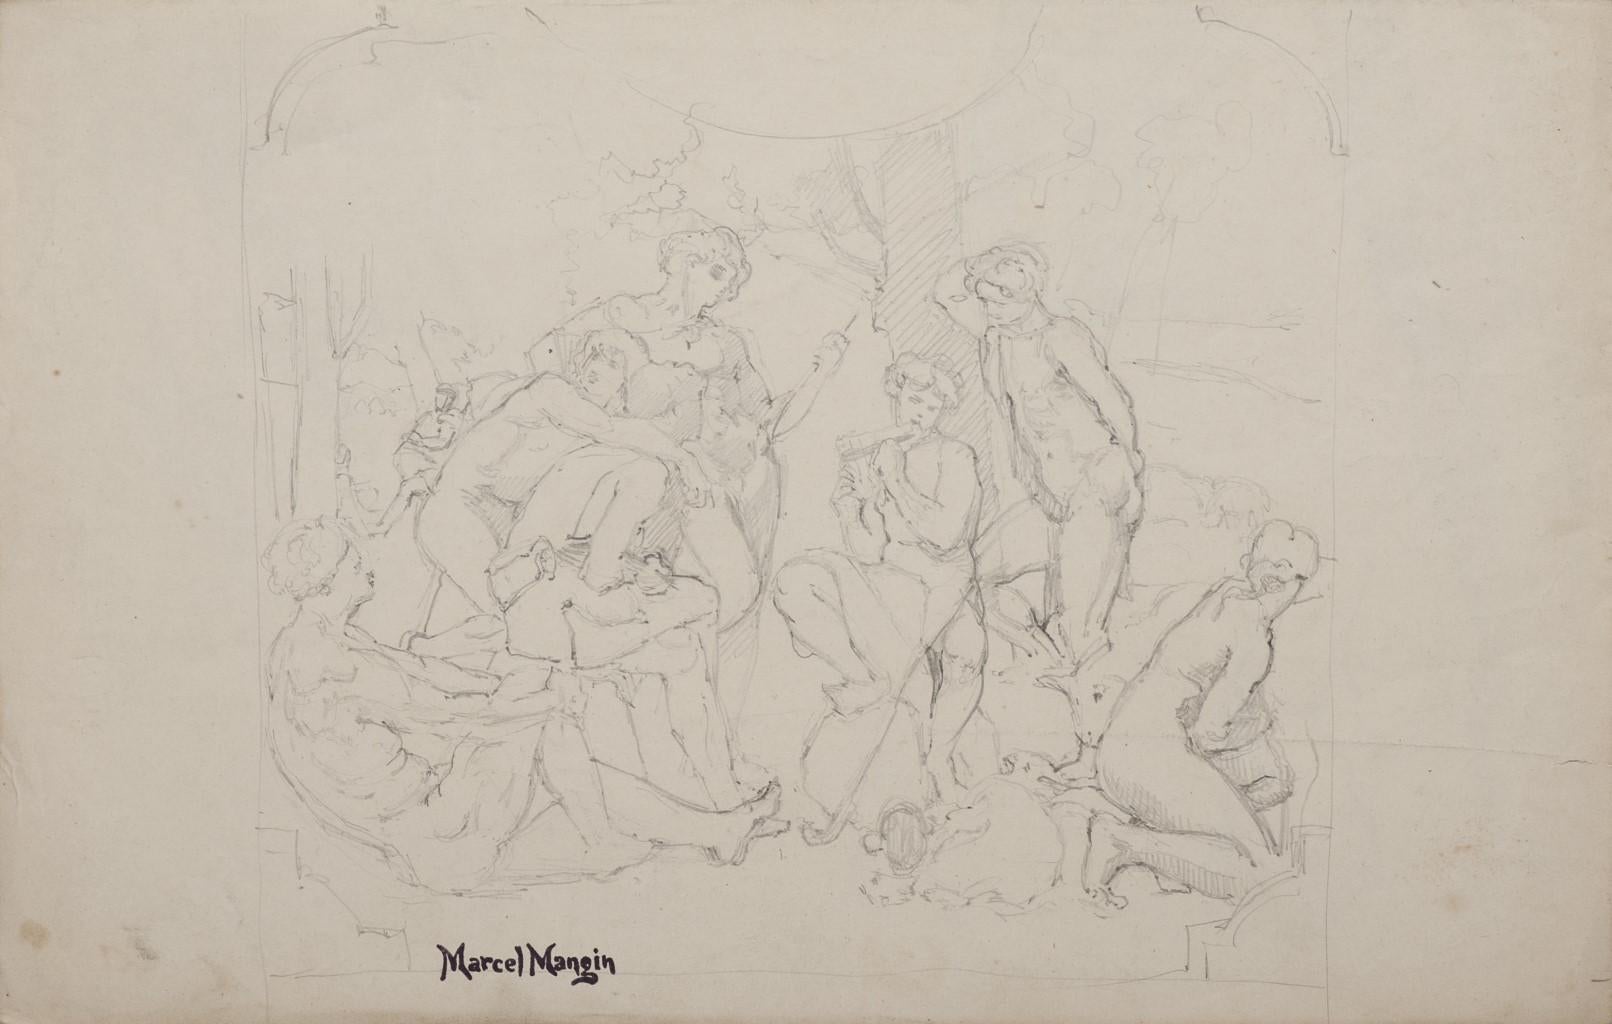 Marcel Mangin  Figurative Art - The Concert of a Faun - Pencil on Paper - 19th Century